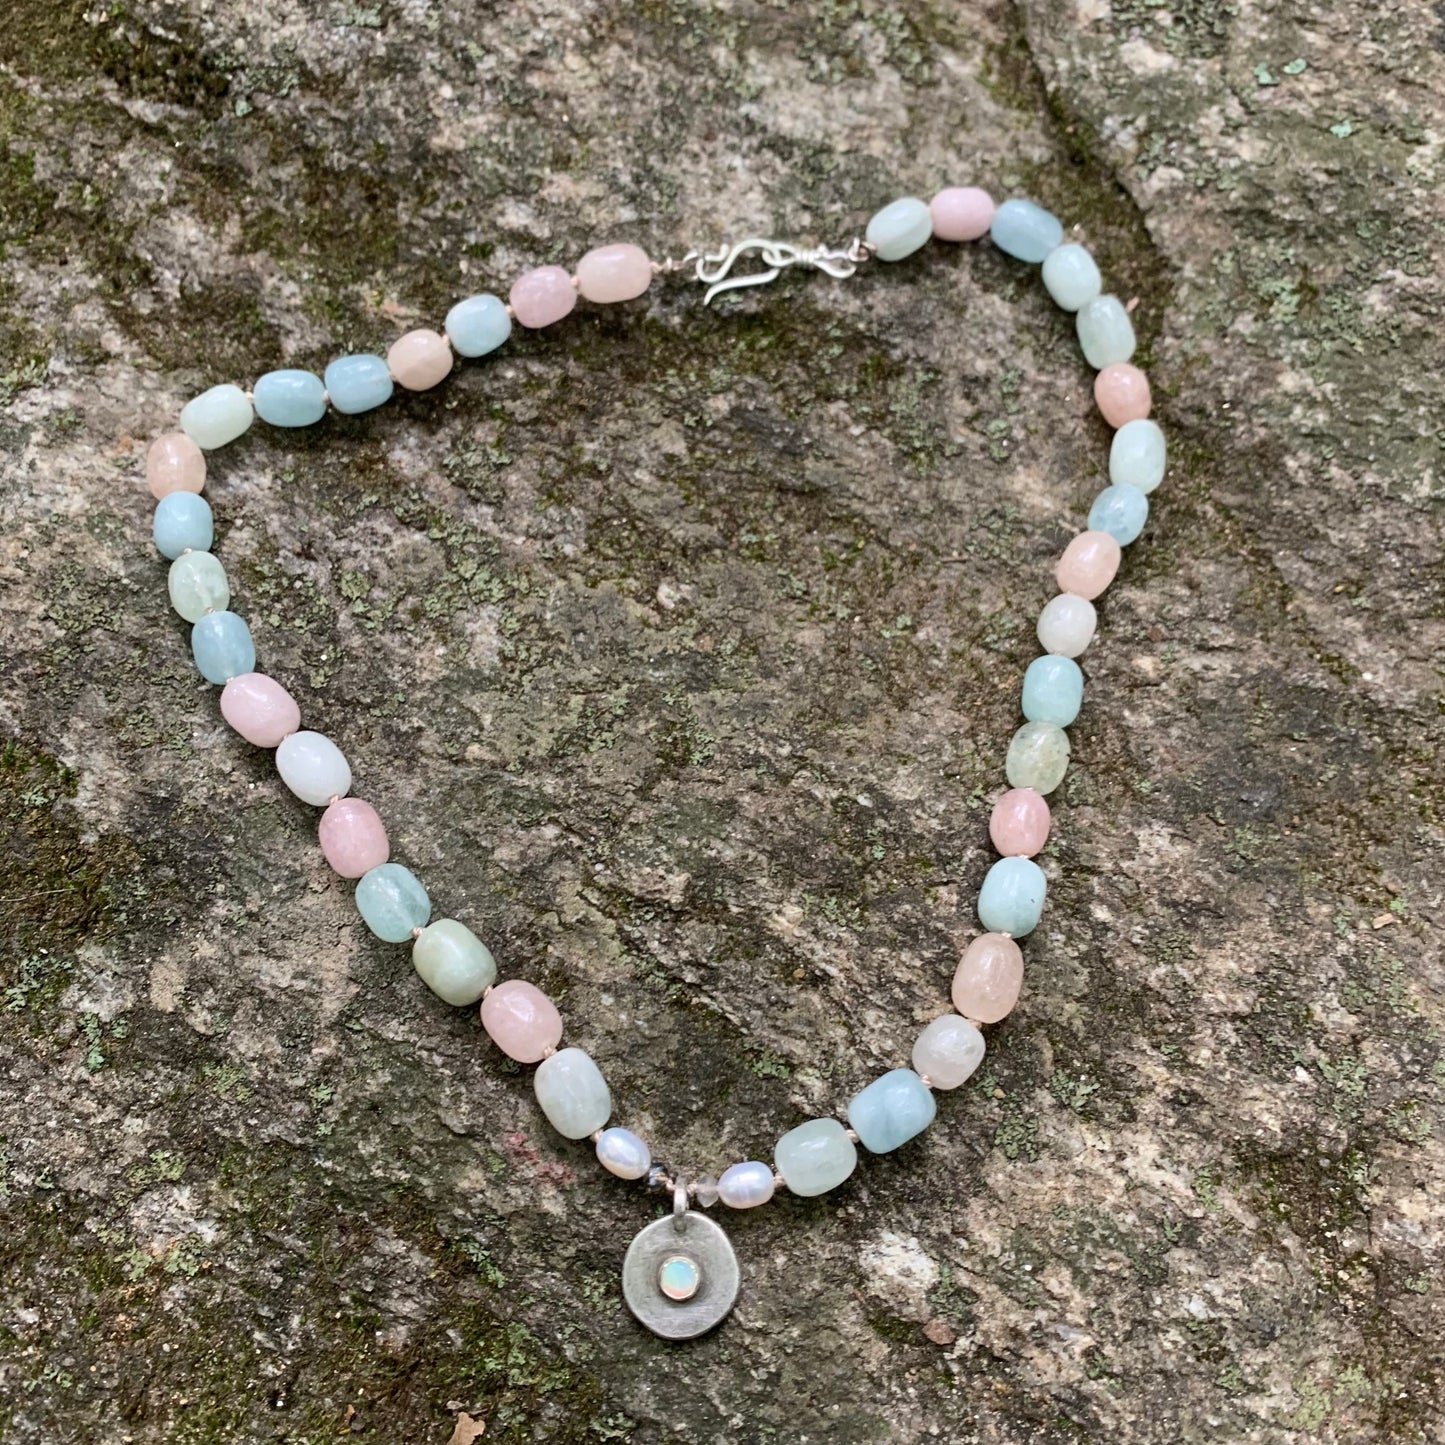 Colorful statement necklace- opal pendant and morganite beads- short choker length - pastel colored gemstone beads - bold feminine jewelry